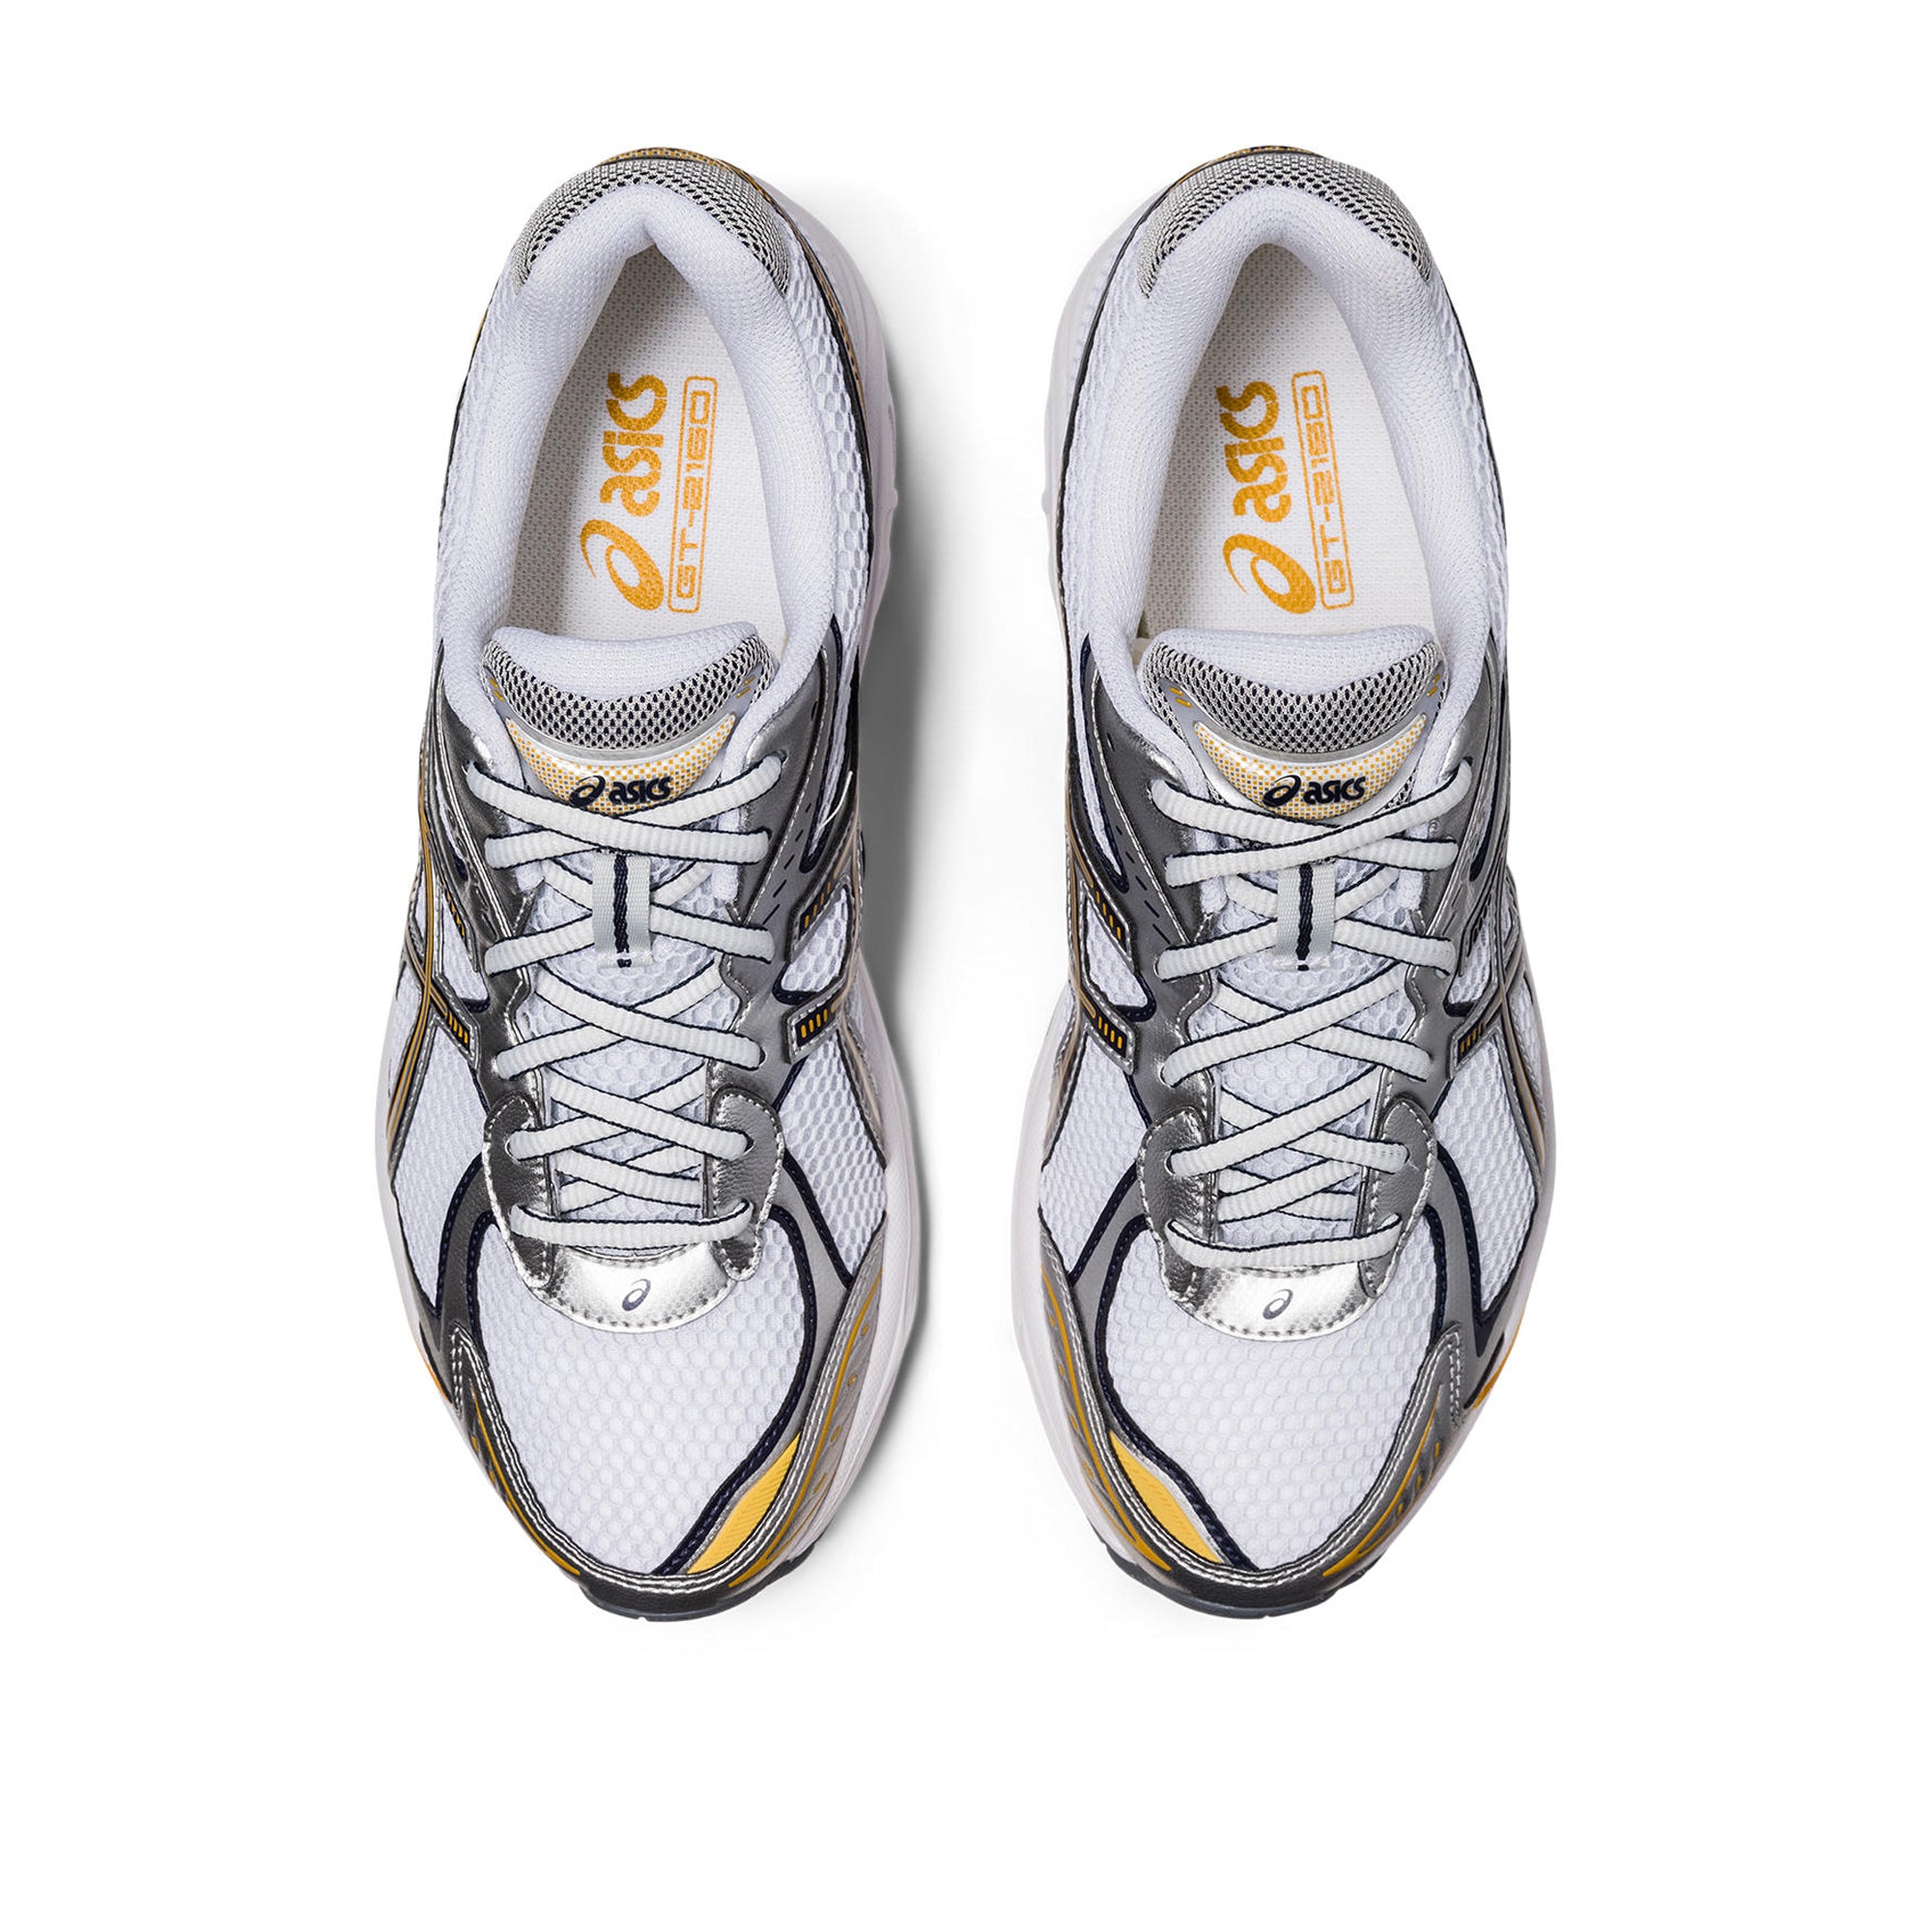 ASICS - Gt-2160 - (White/Pure Silver) view 5